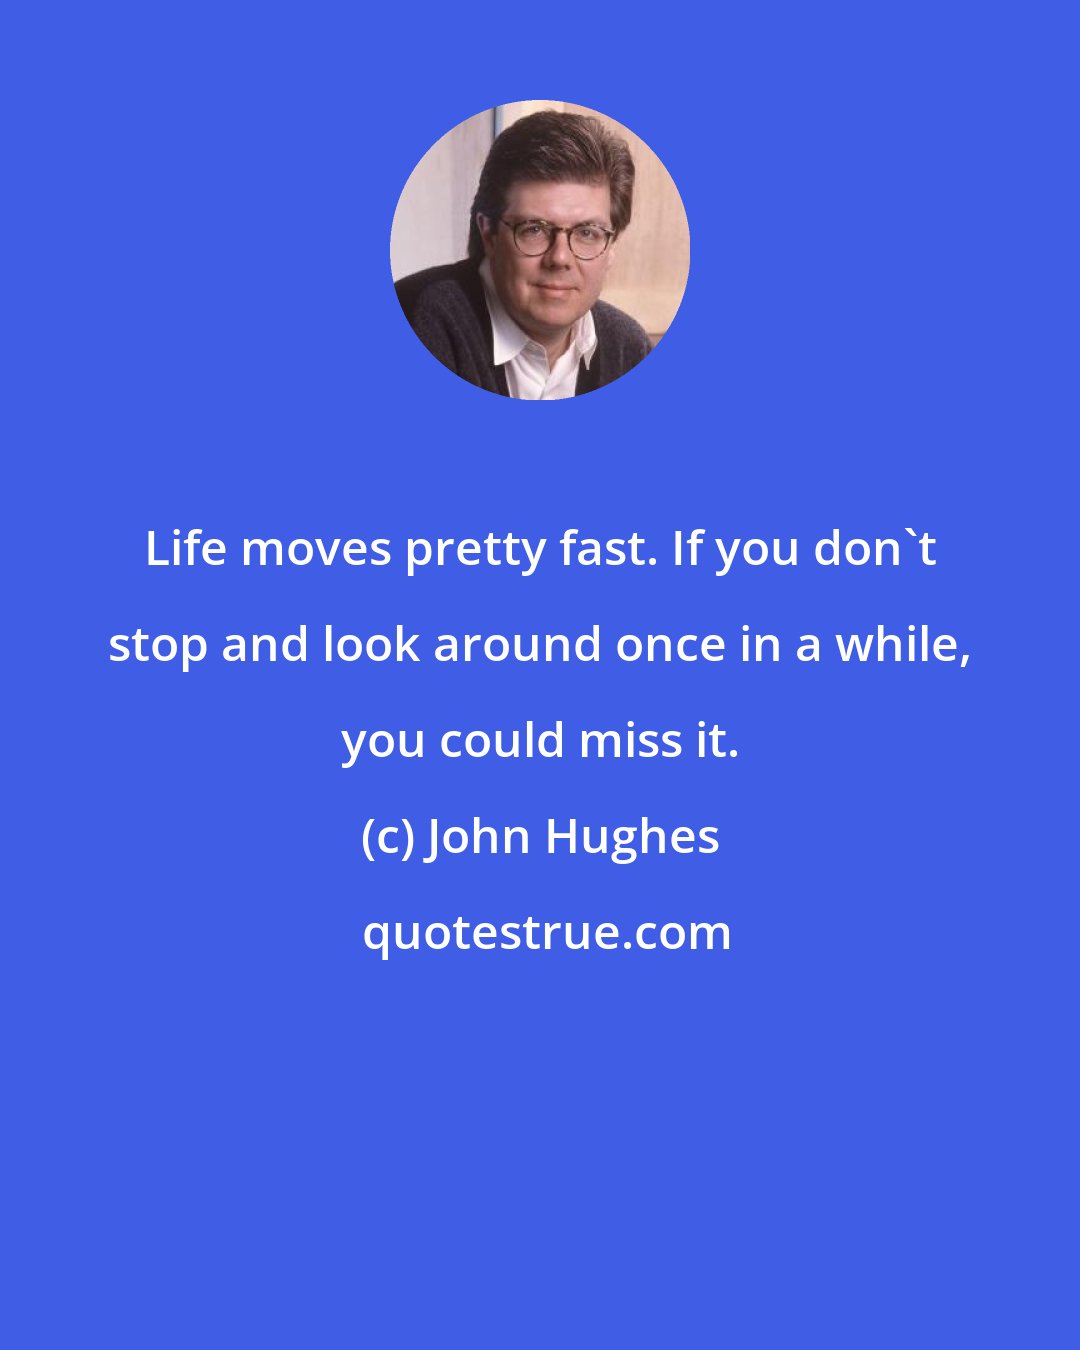 John Hughes: Life moves pretty fast. If you don't stop and look around once in a while, you could miss it.